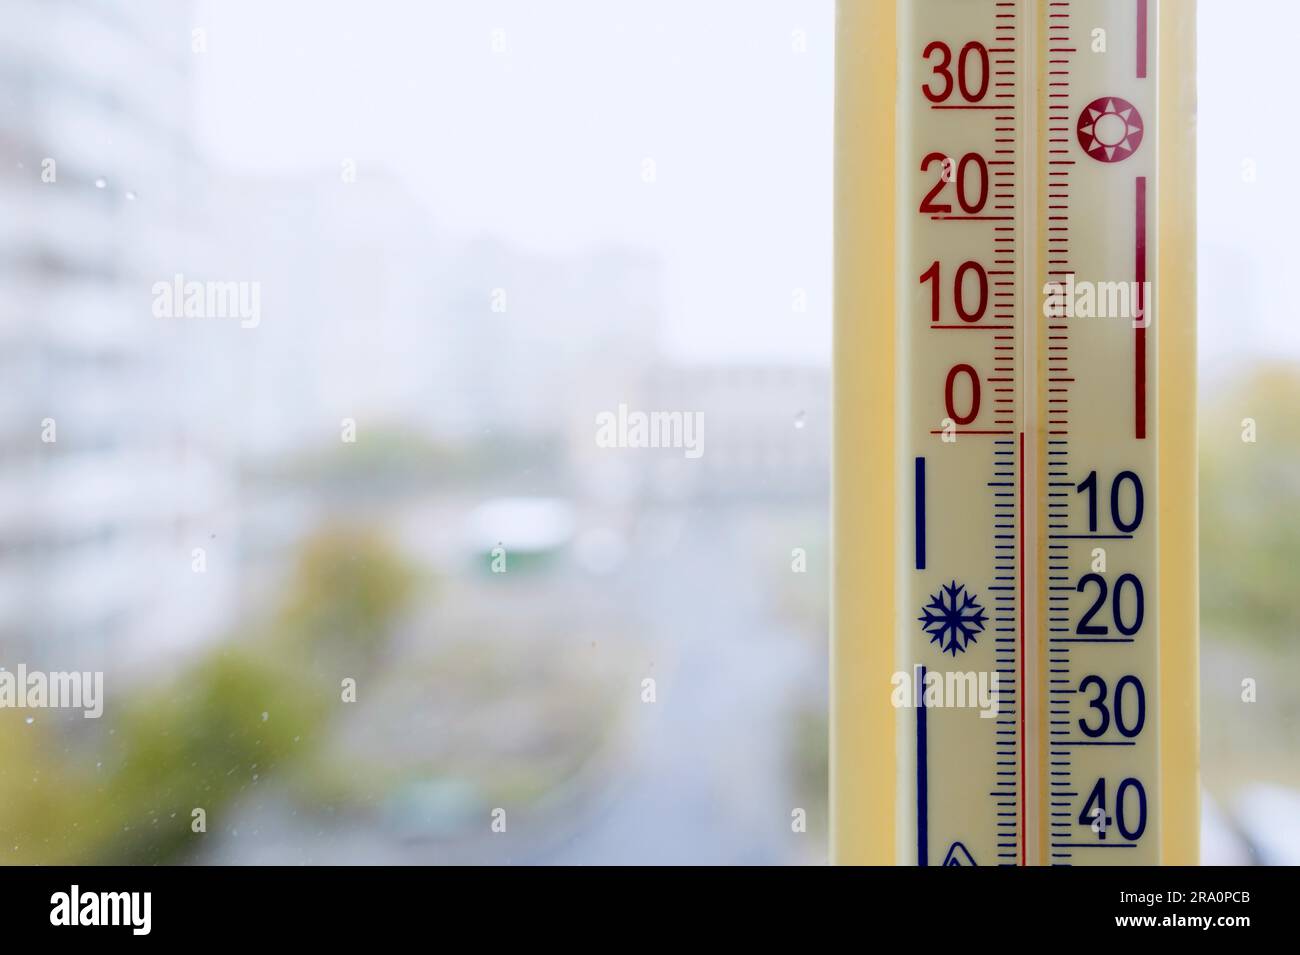 https://c8.alamy.com/comp/2RA0PCB/a-thermometer-fixed-out-of-the-window-shows-that-it-is-zero-degree-celsius-outdoor-while-it-is-warm-inside-the-room-2RA0PCB.jpg